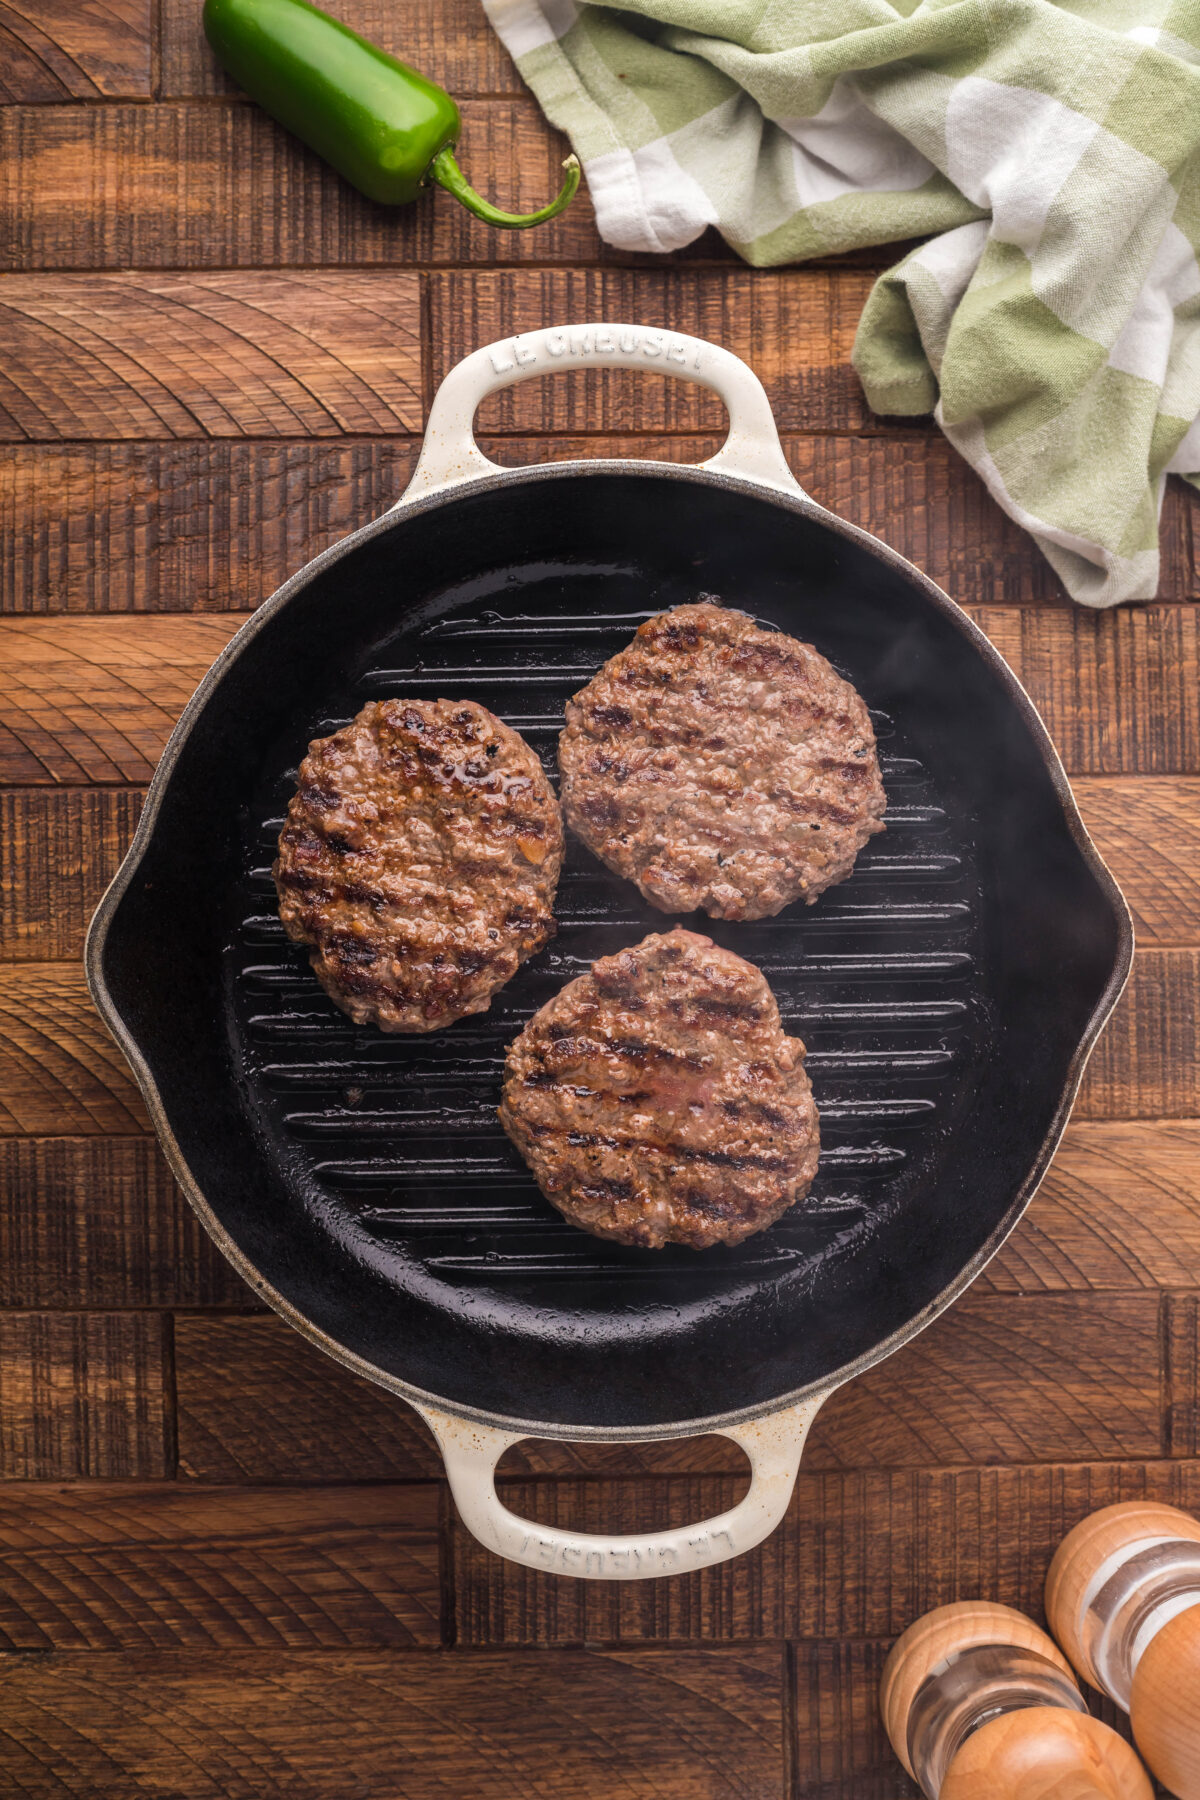 Cooked burger patties in a grill pan.